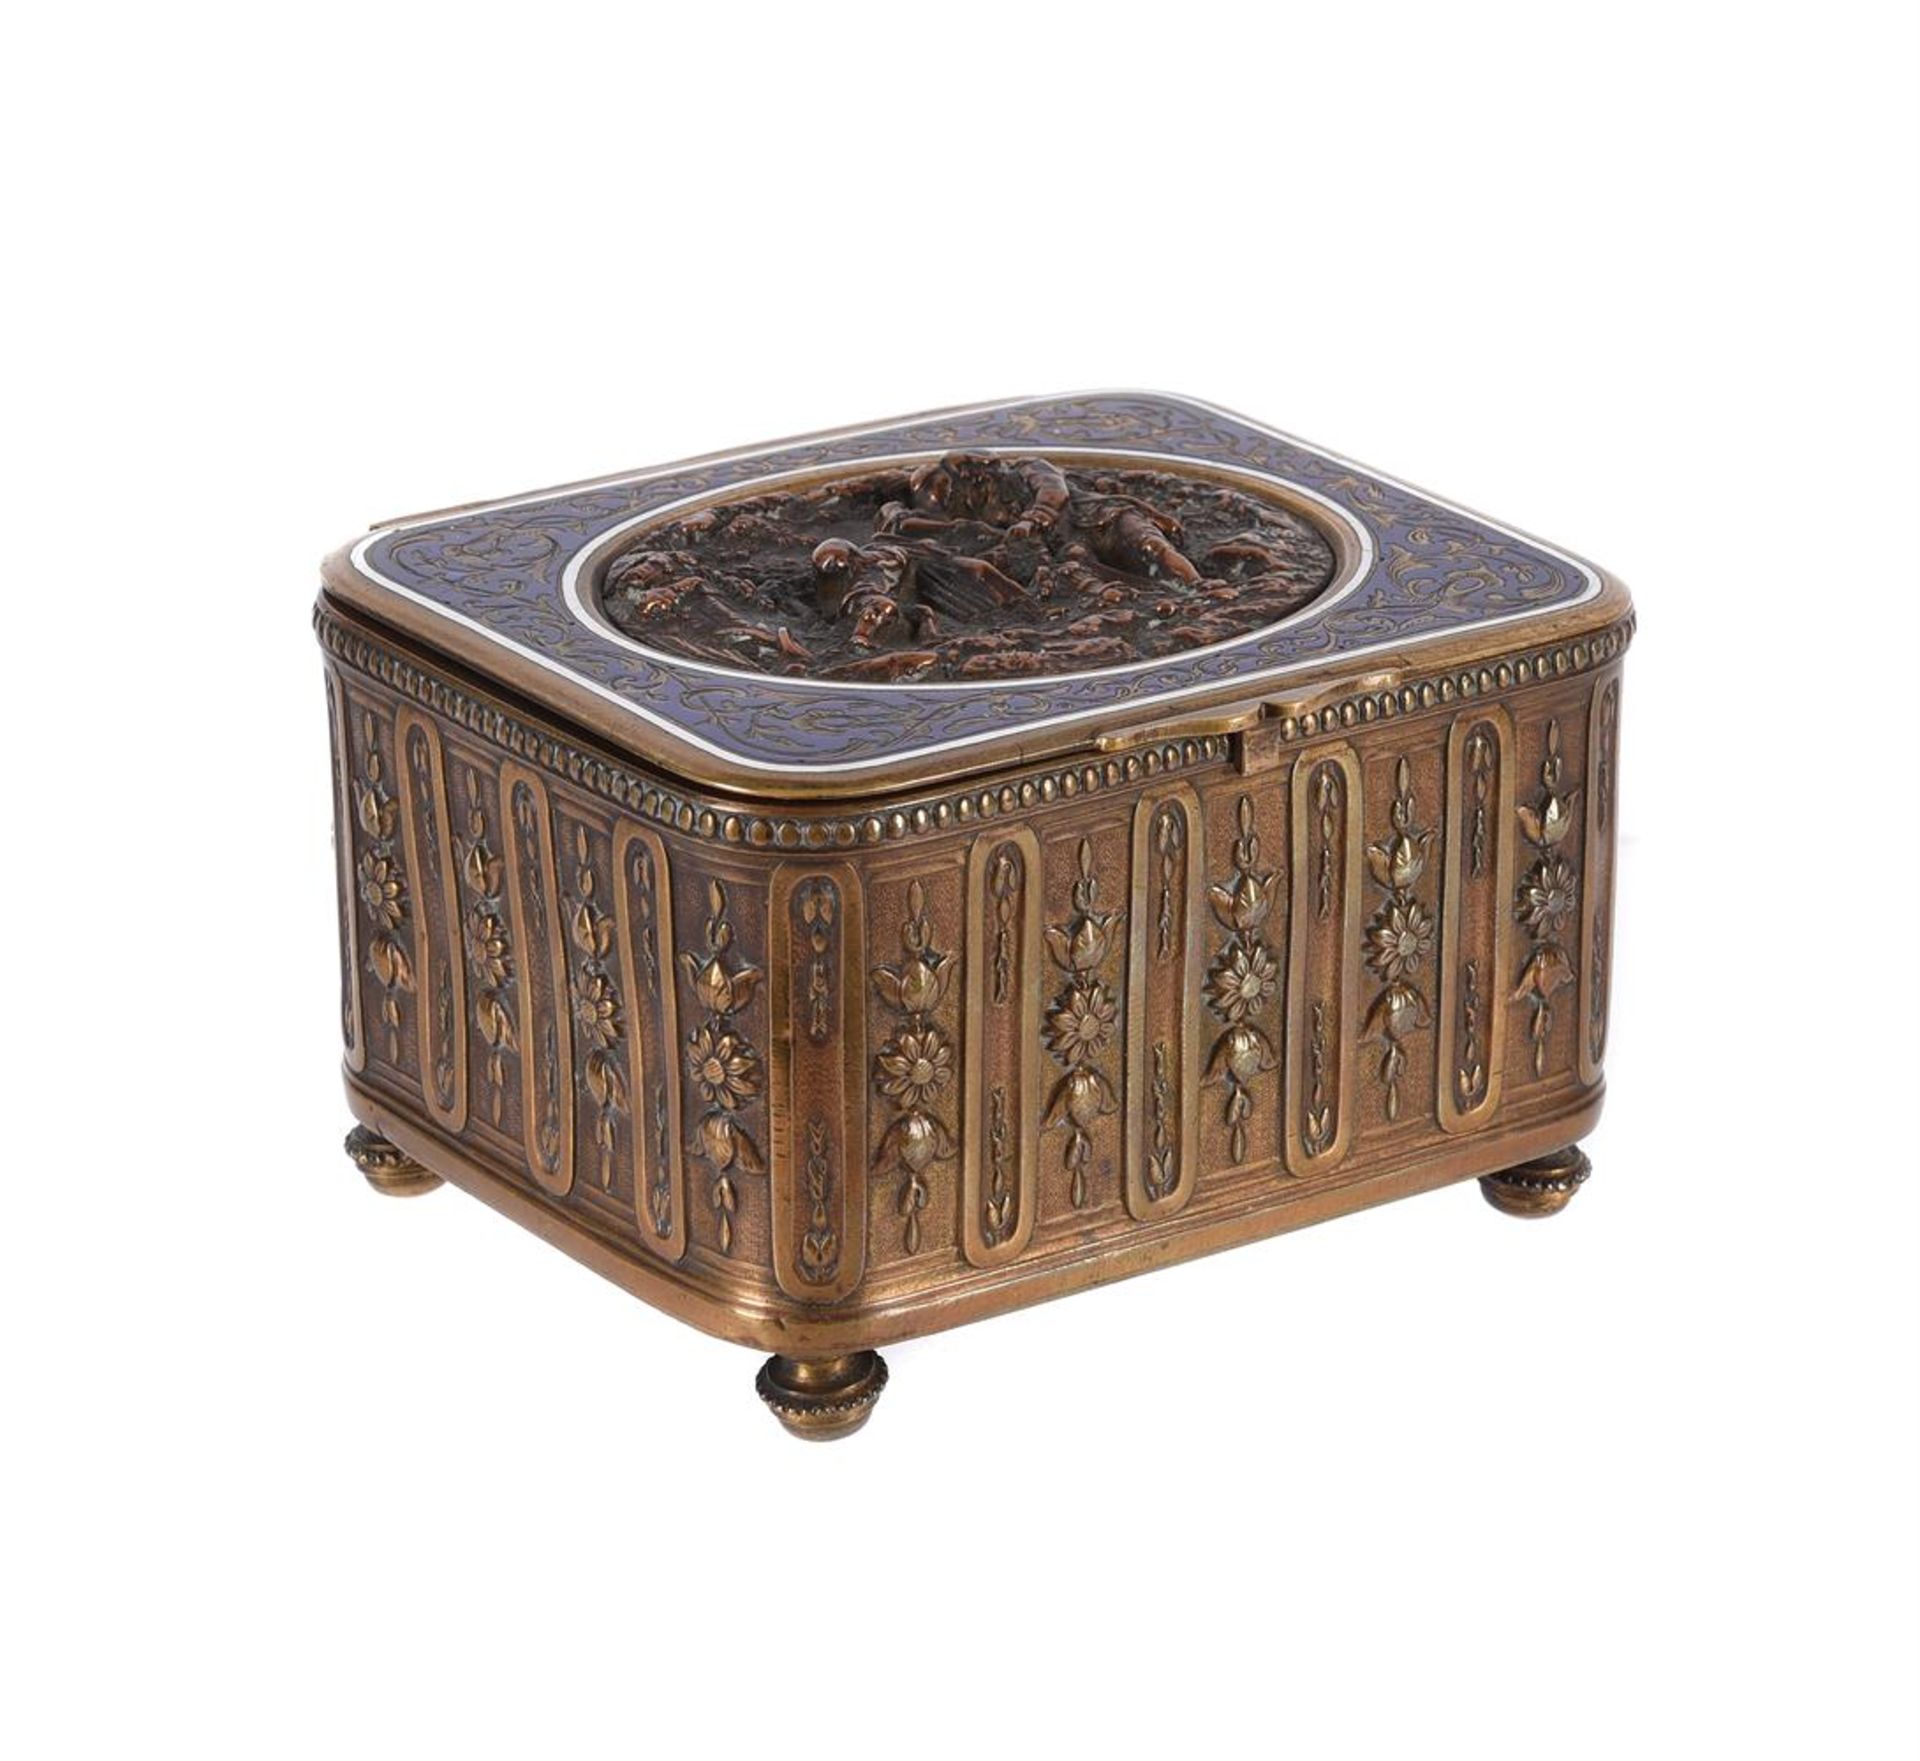 A FRENCH CHAMPLEVE ENAMEL DECORATED MUSICAL BOX